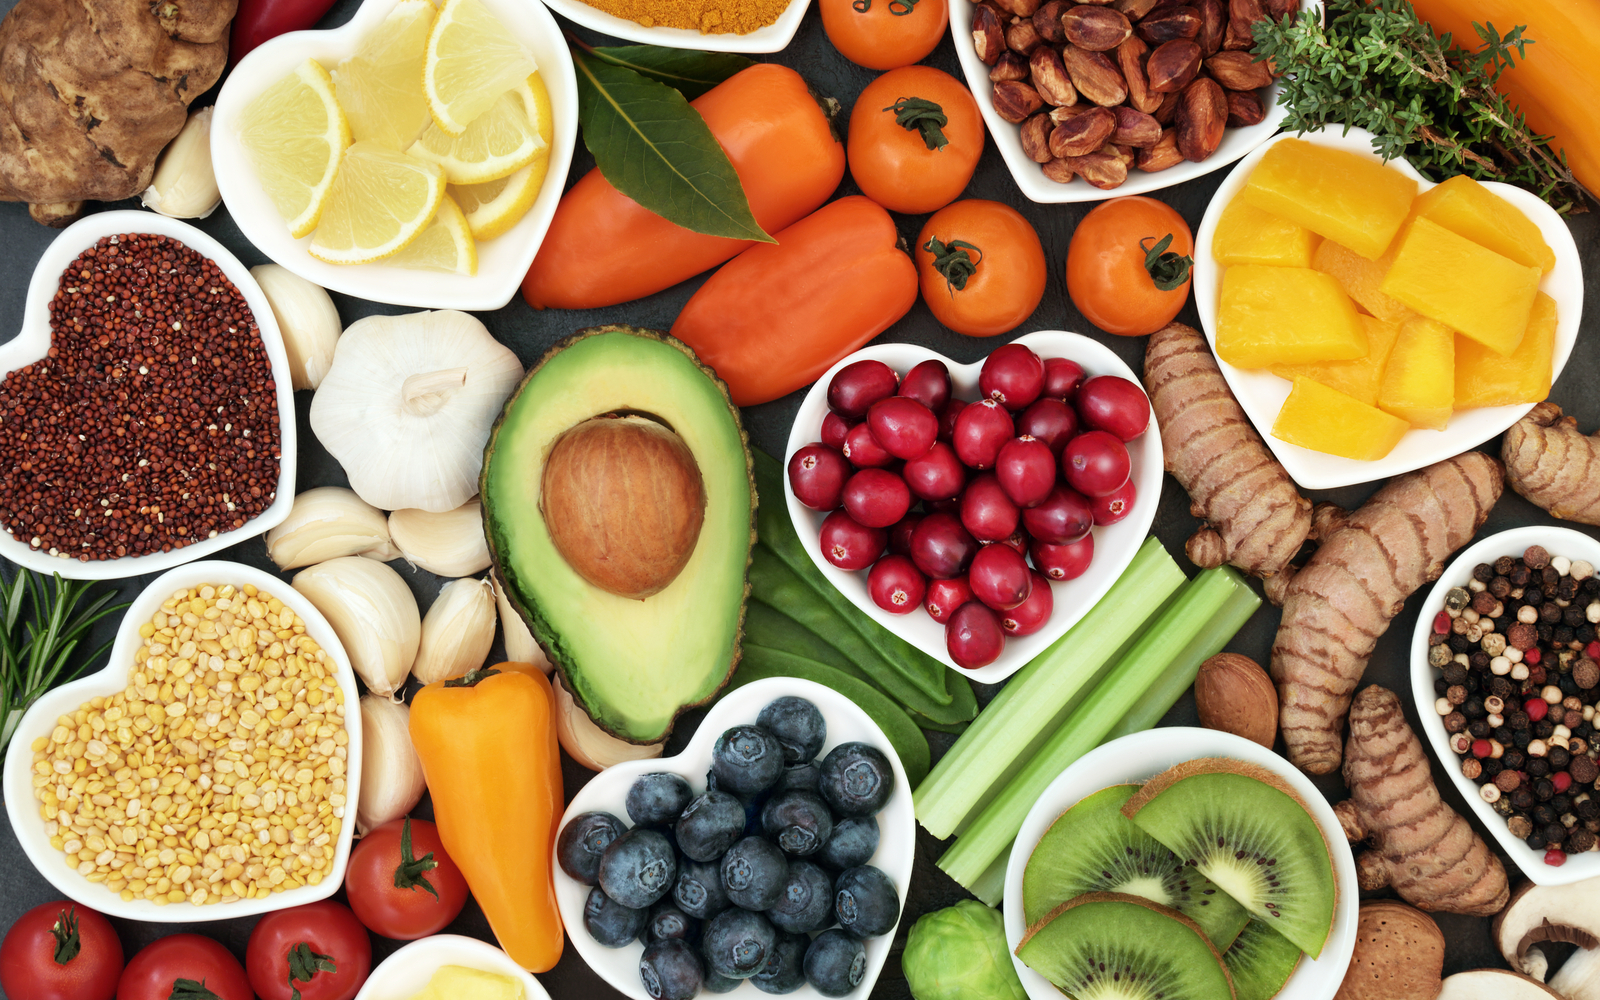 A collection of healthy foods